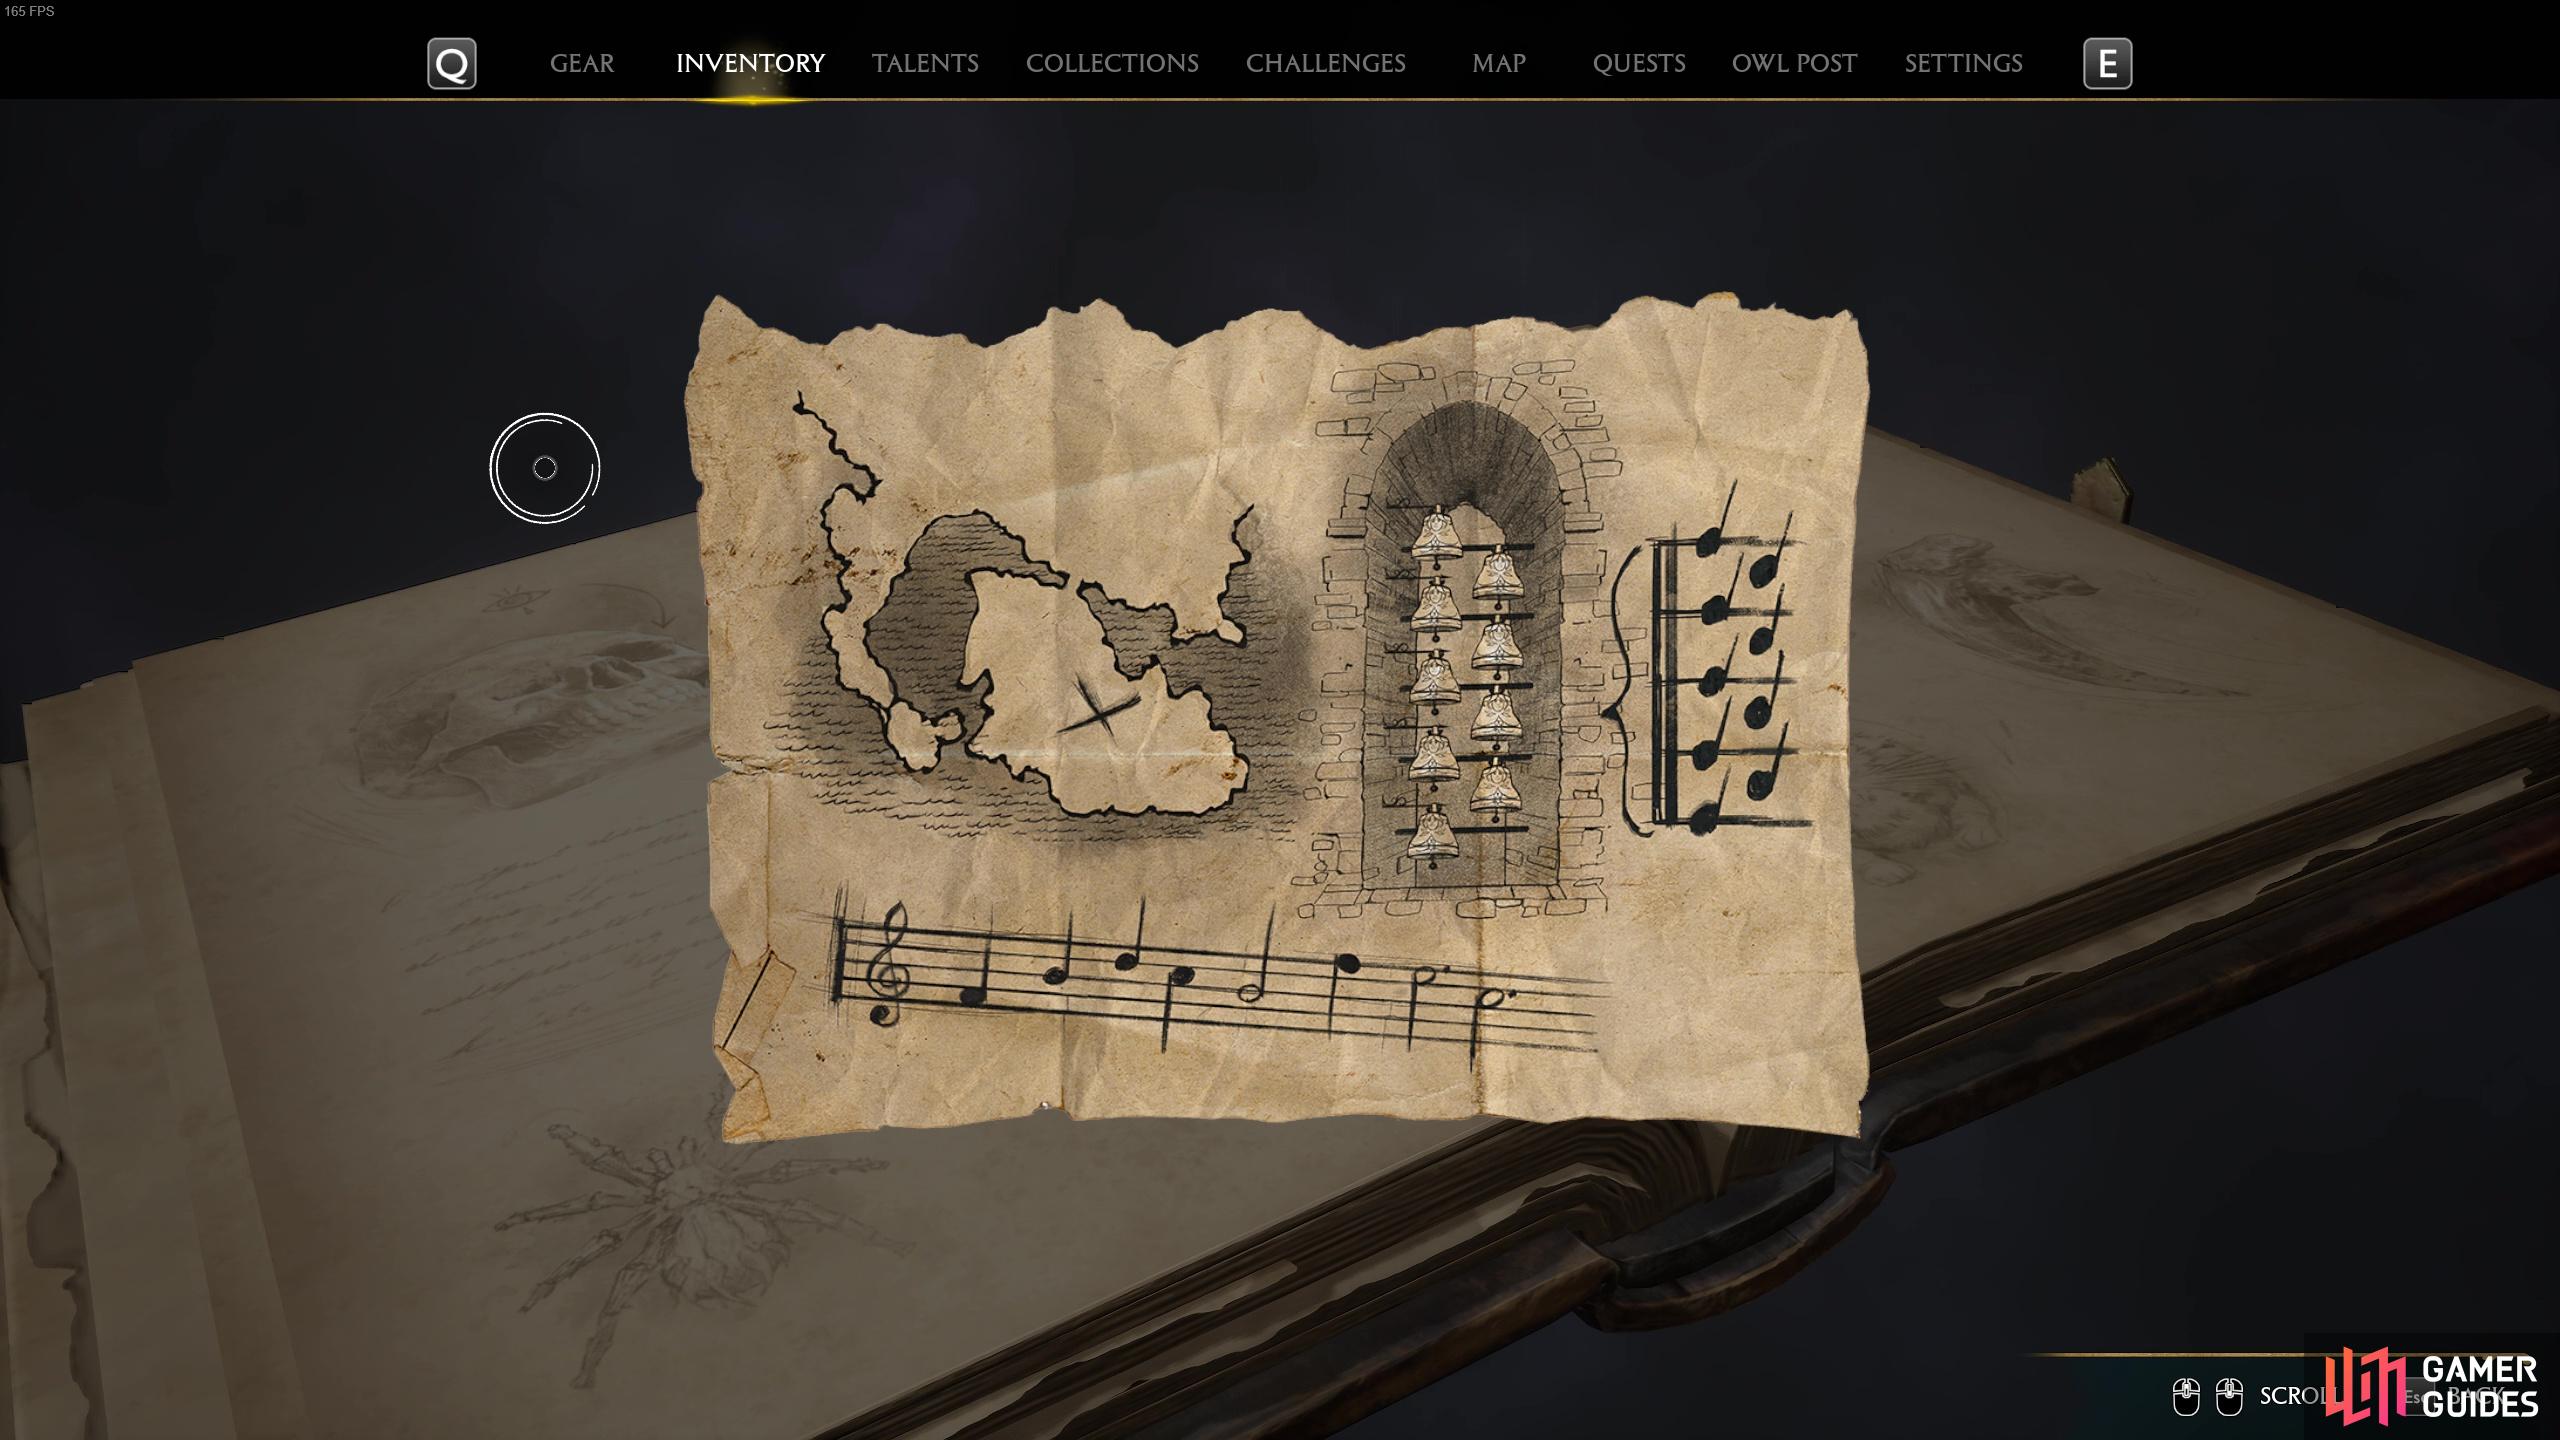 The musical map holds the key to the puzzle!